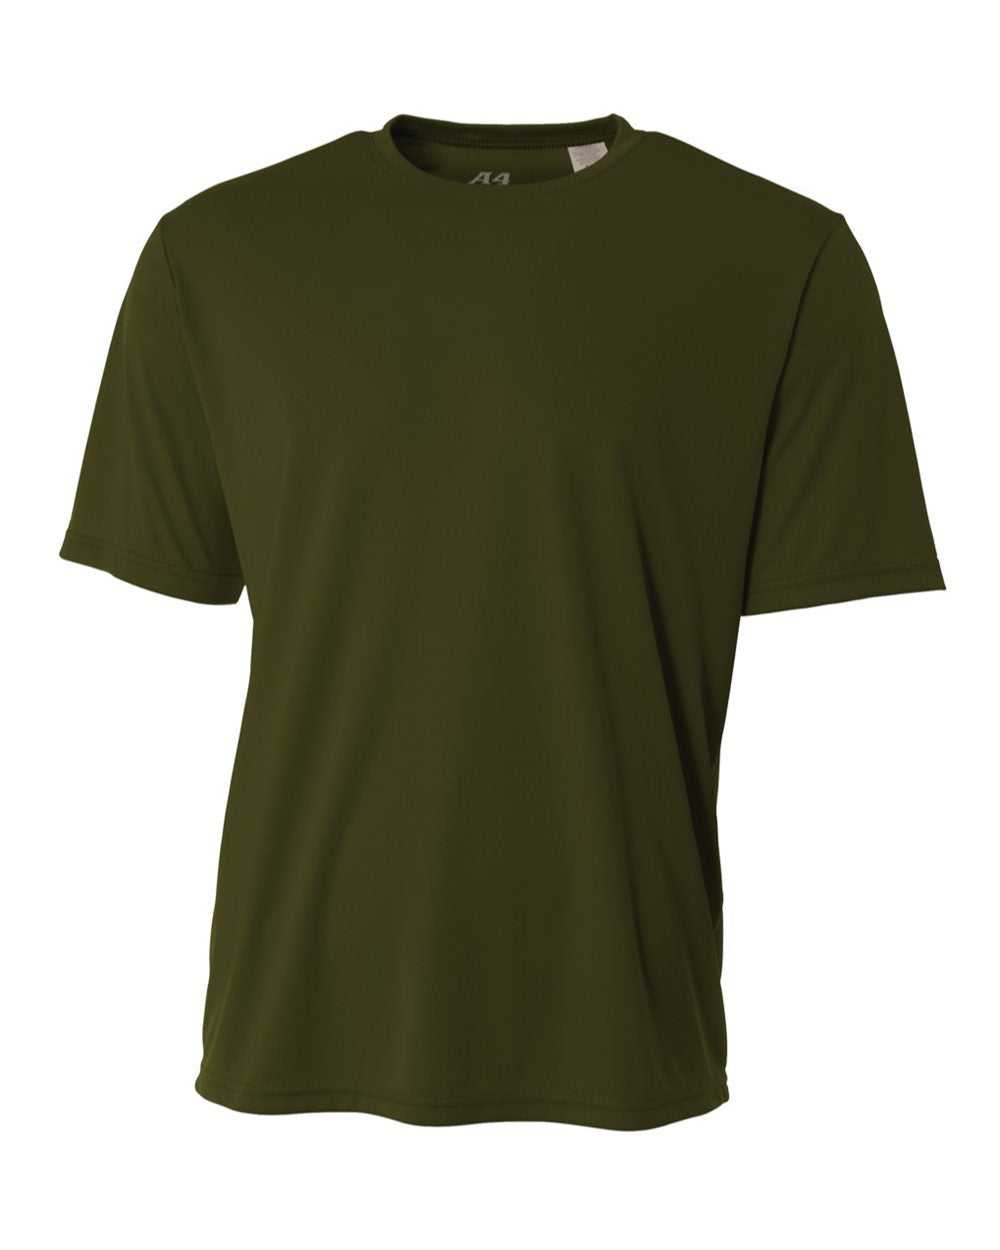 A4 N3142 Cooling Performance Crew - Military Green - HIT a Double